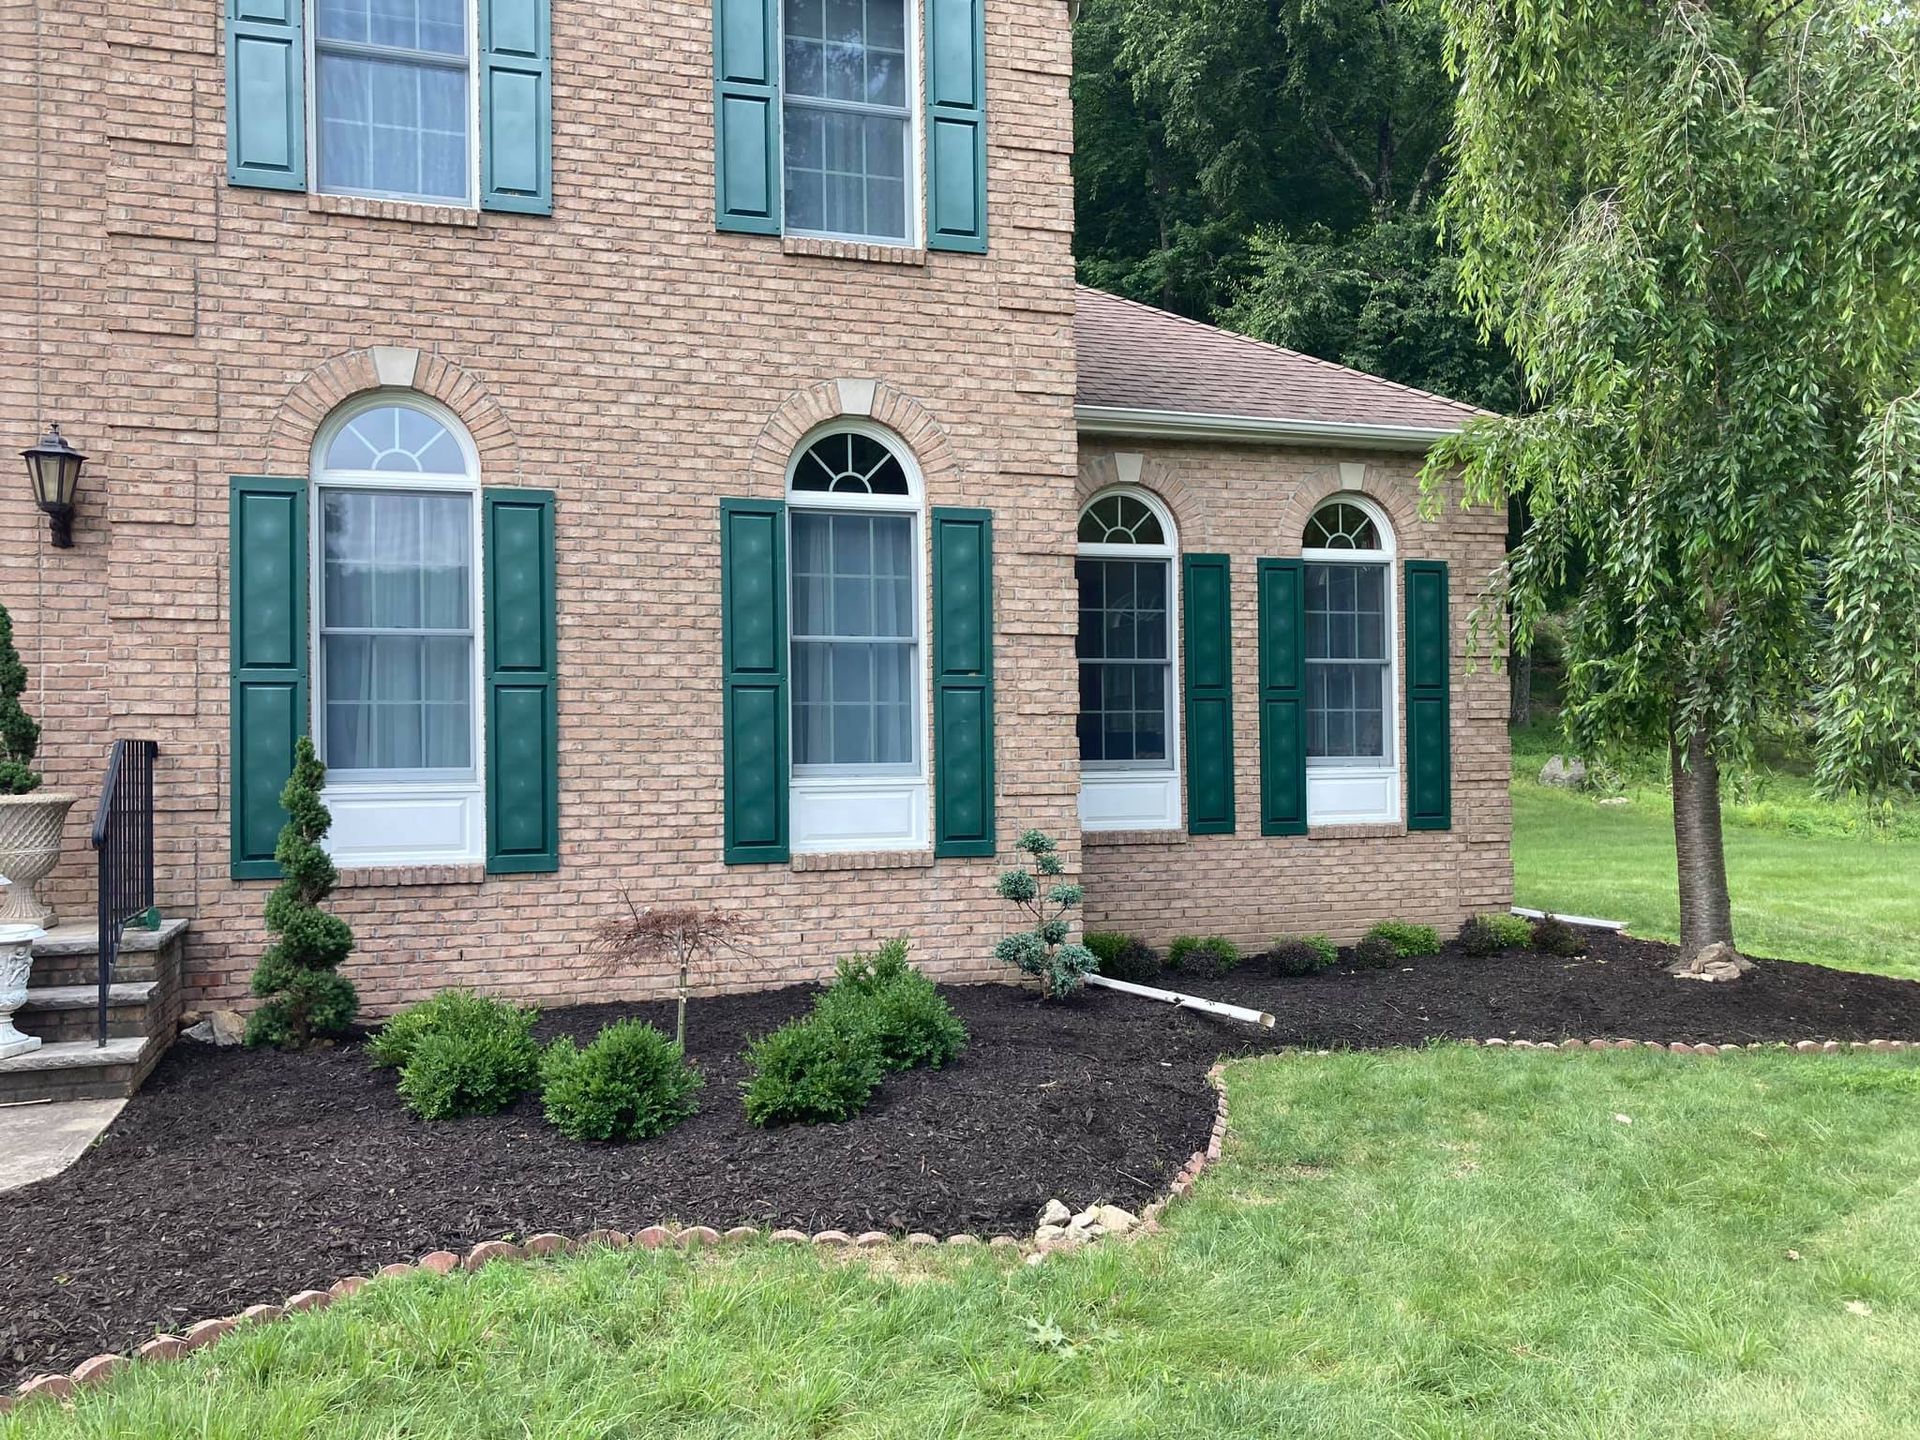 Front side of a house that had landscaping completed with fresh mulch laid out, grass cut and plants trimmed.